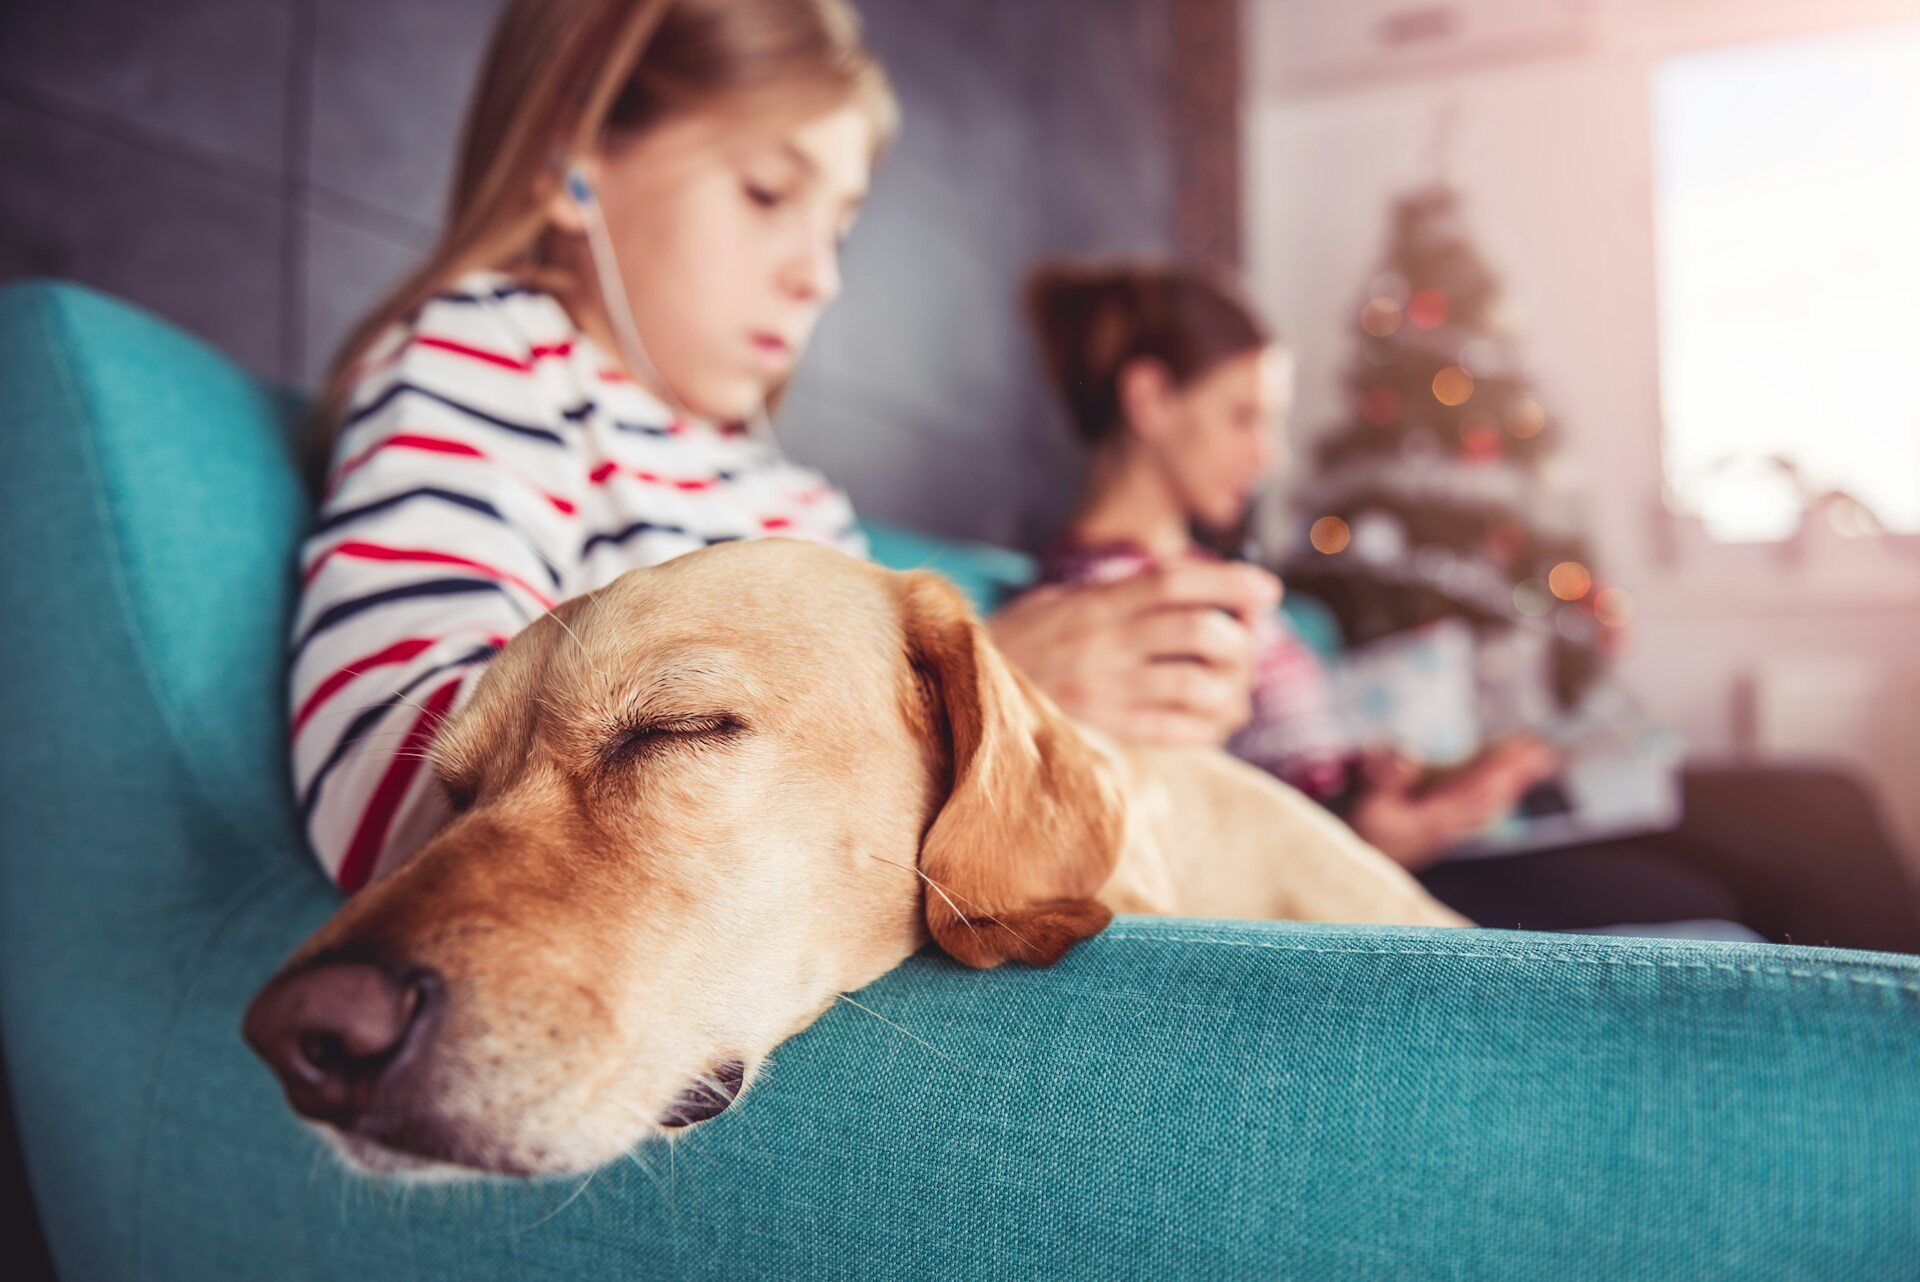 A dog napping on a couch next to a young girl and woman